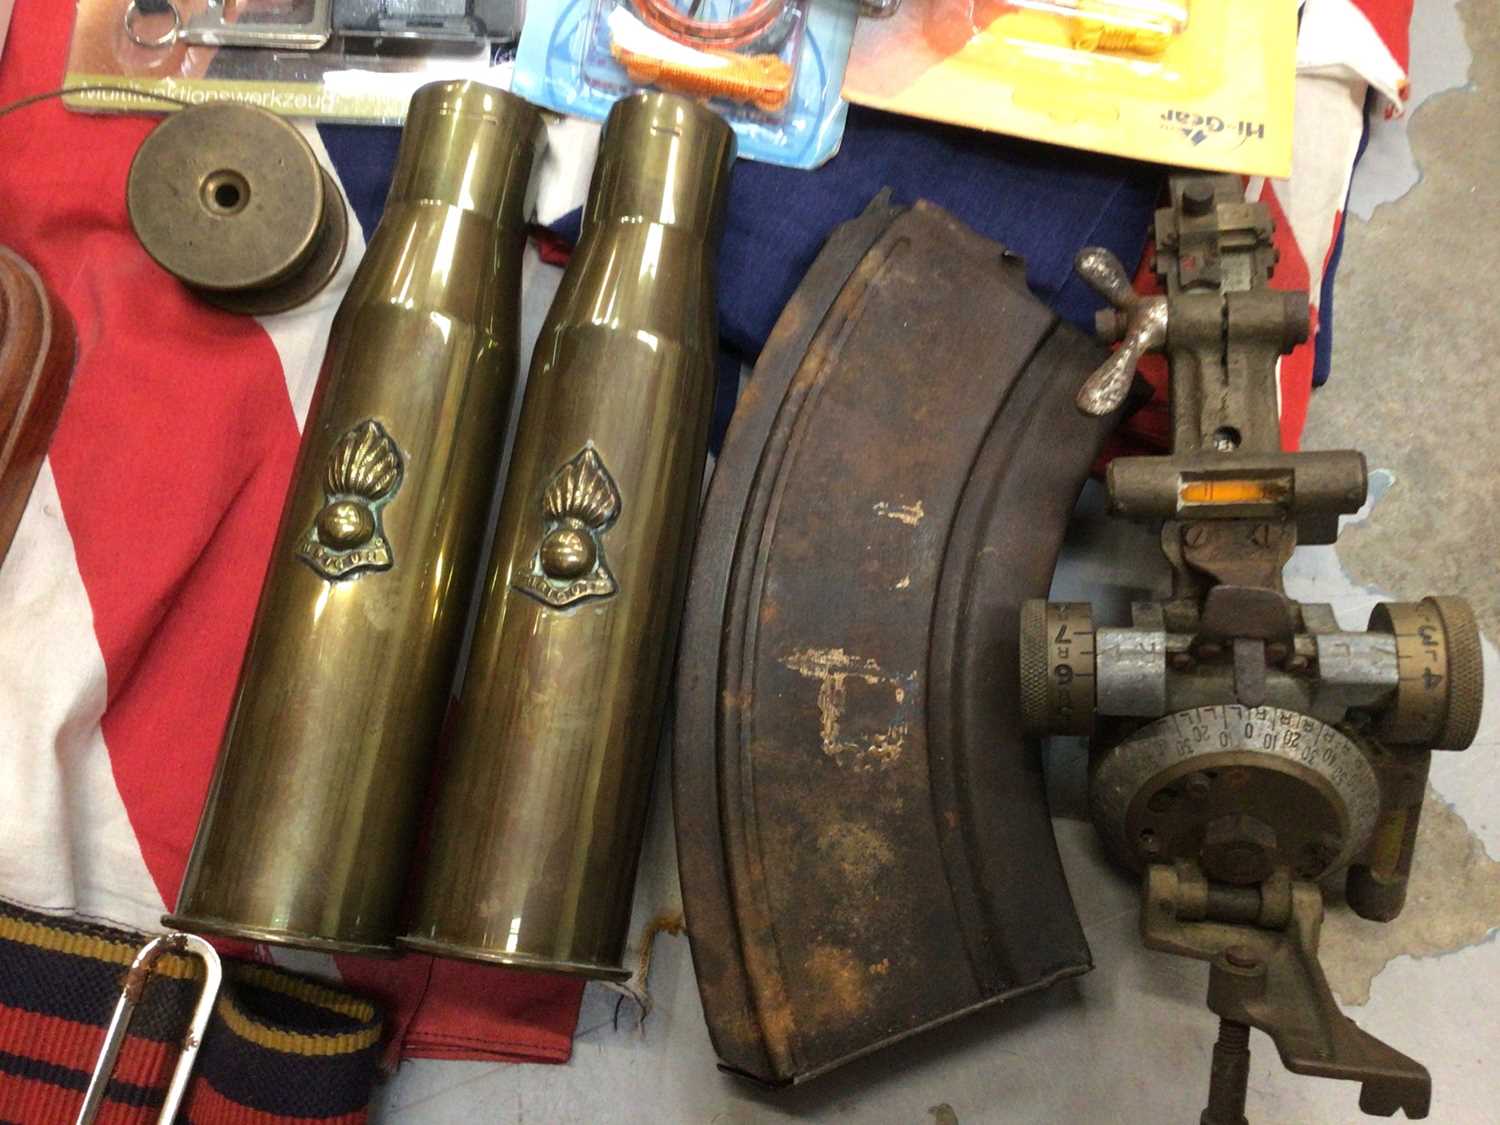 Pair of brass shell cases, The Royal Logistic Corps belt, gun magazine, two Union Jack flags and a s - Image 2 of 4